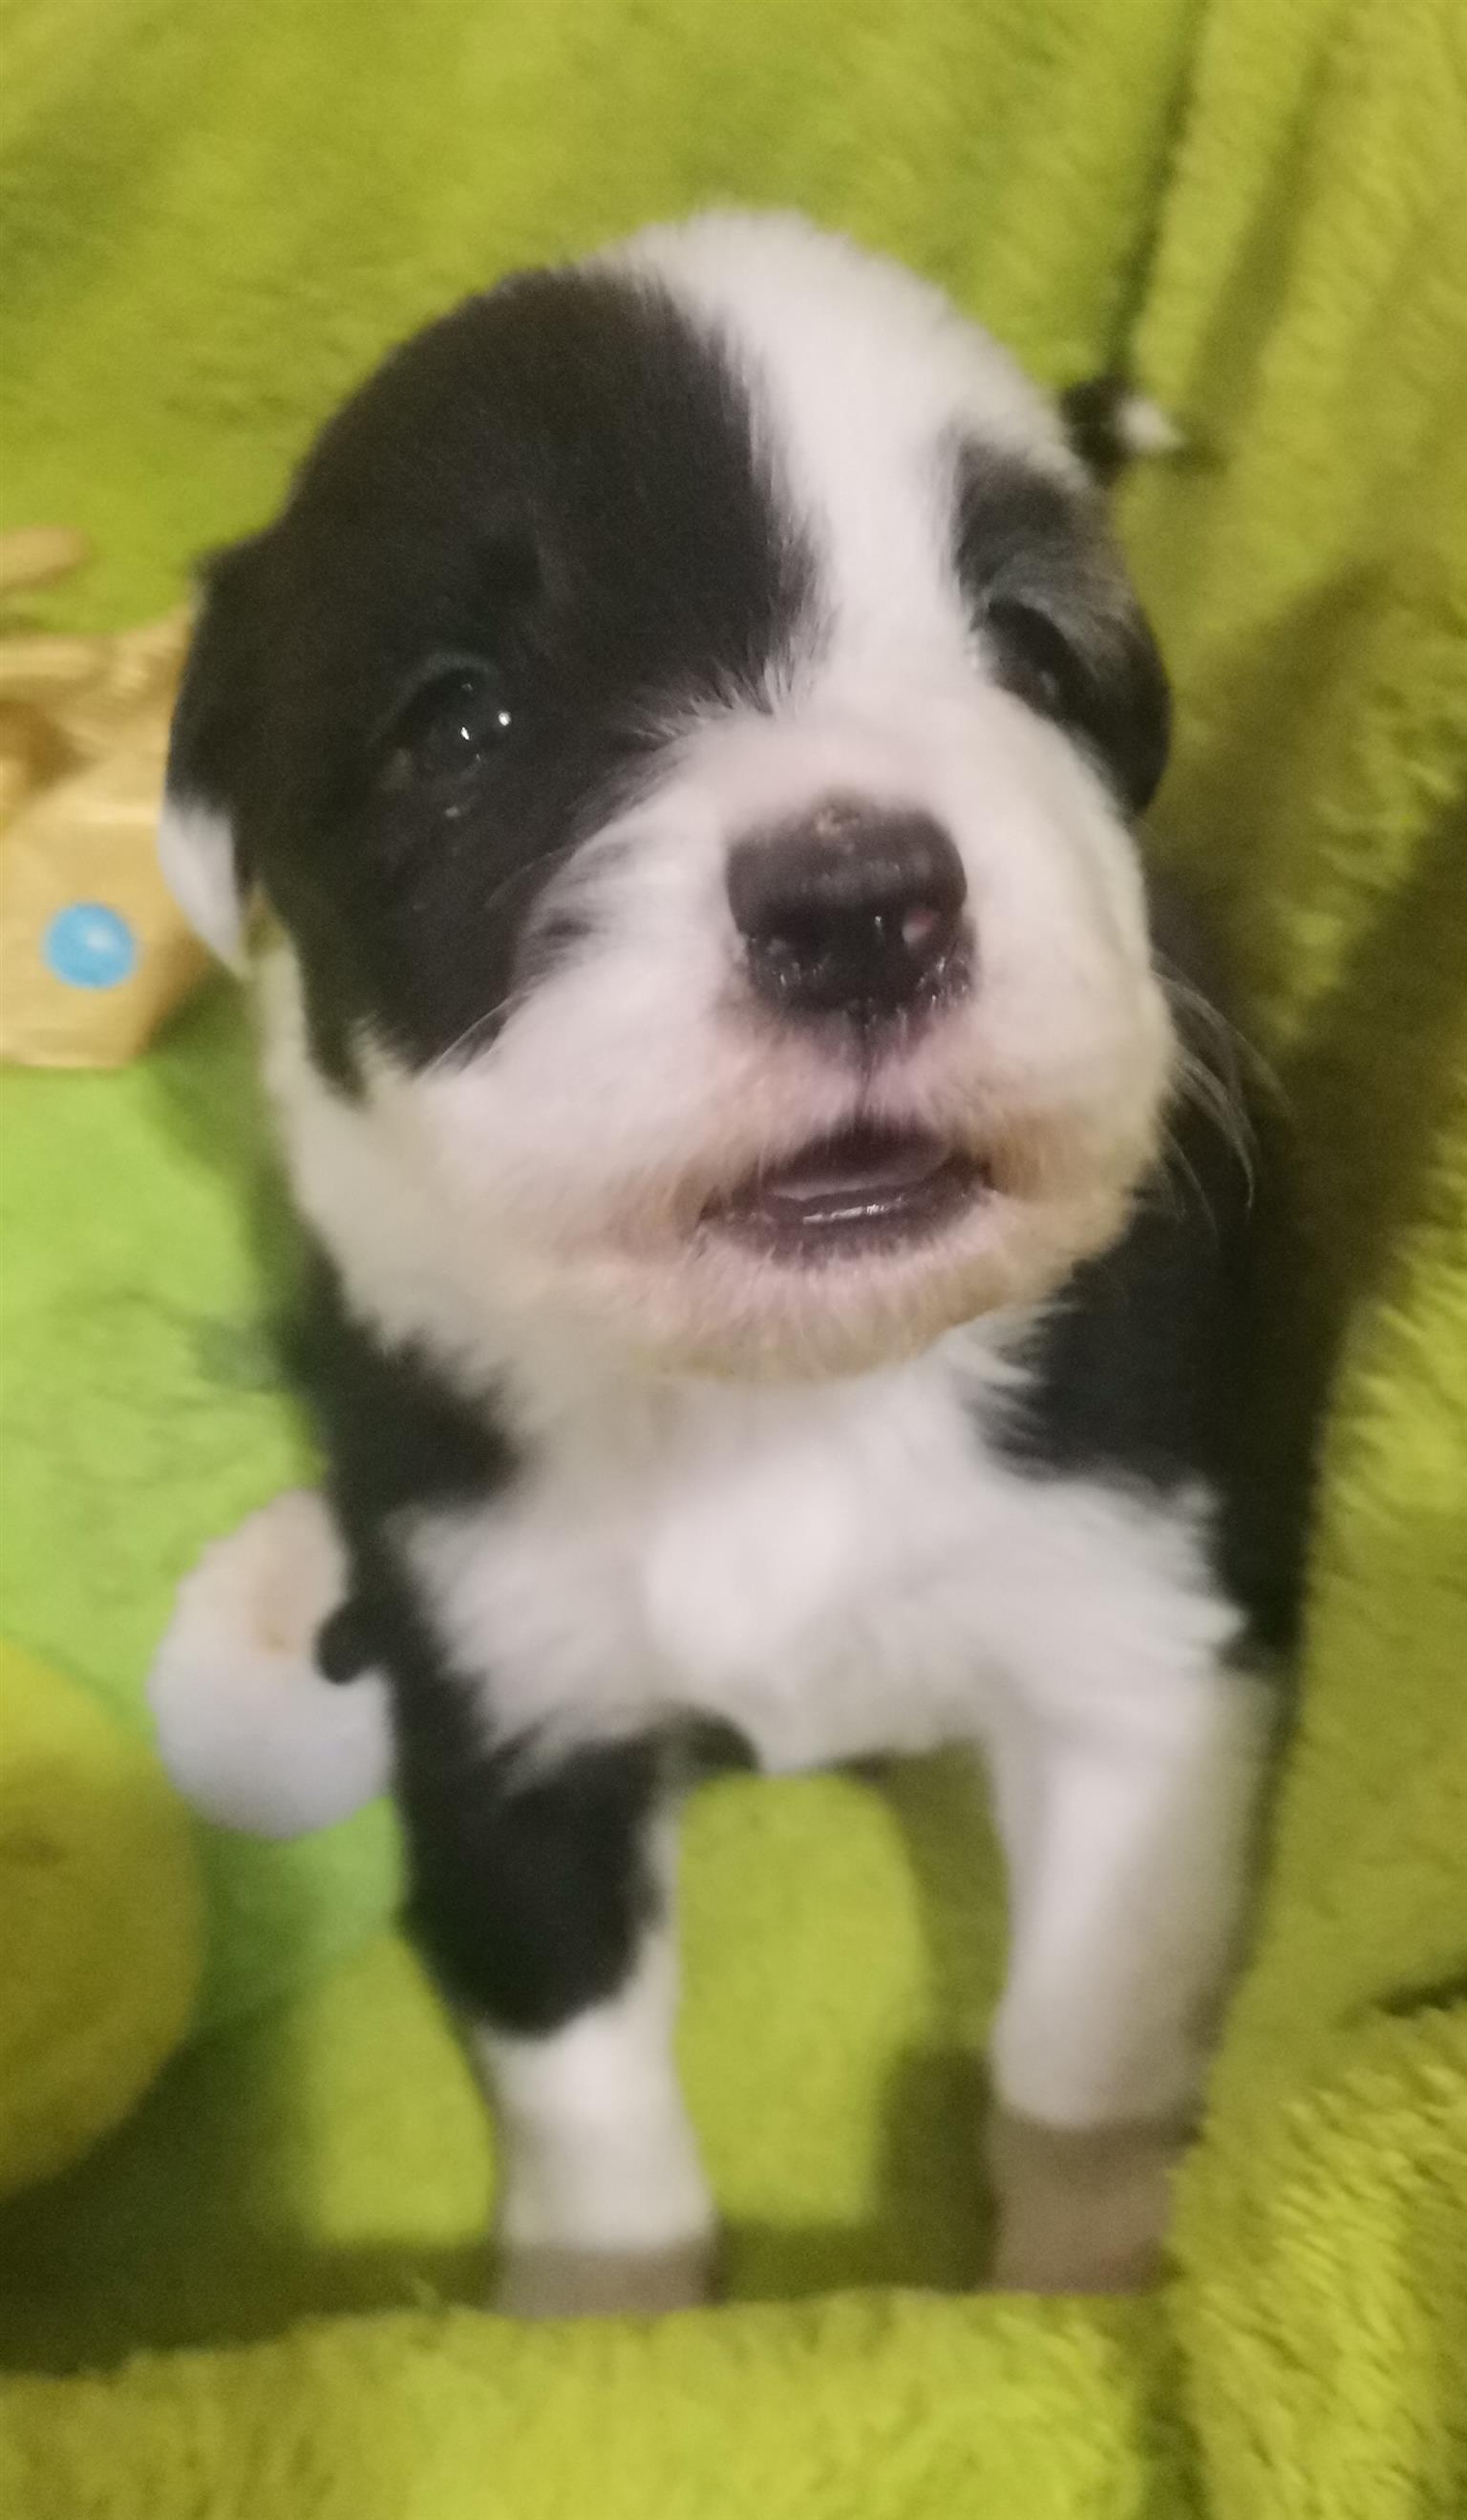 Bordercollie puppy's / skaaphondjies. 1 female and 5 males